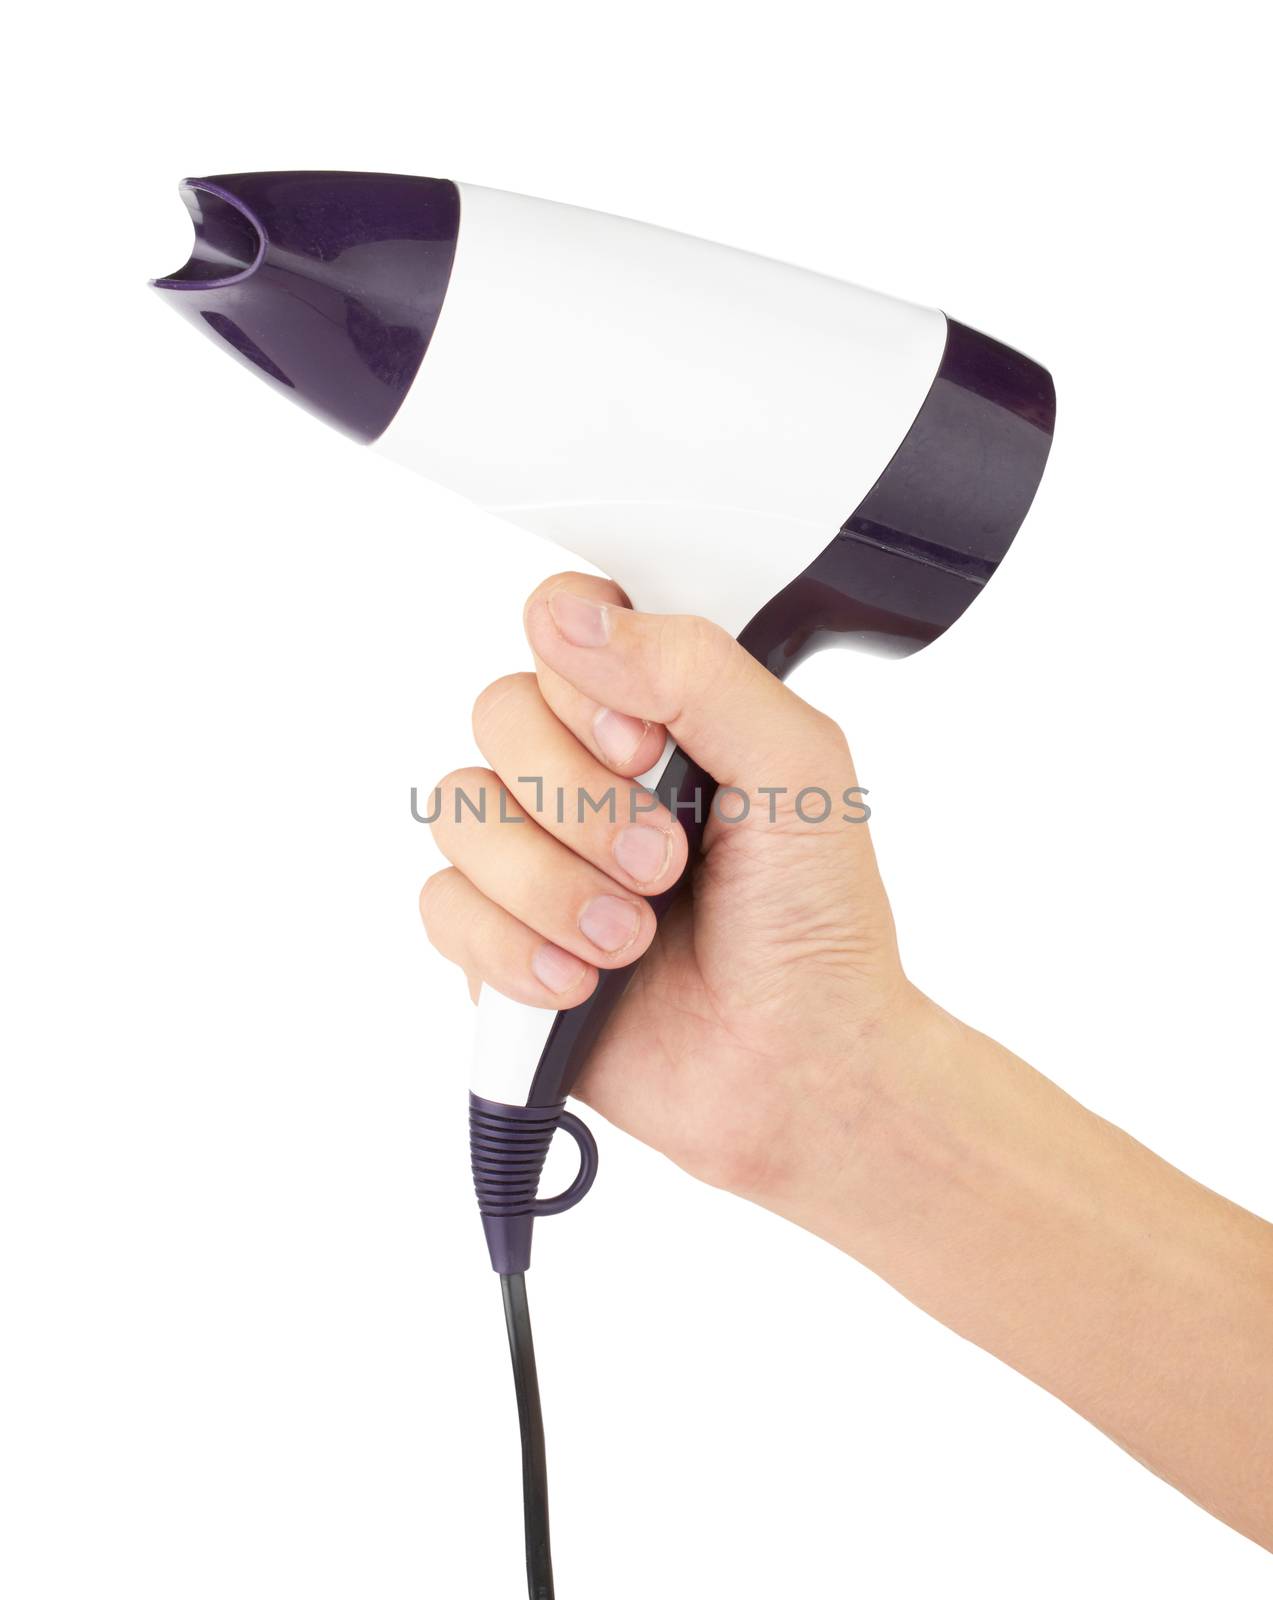  hairdryer in hand by pioneer111